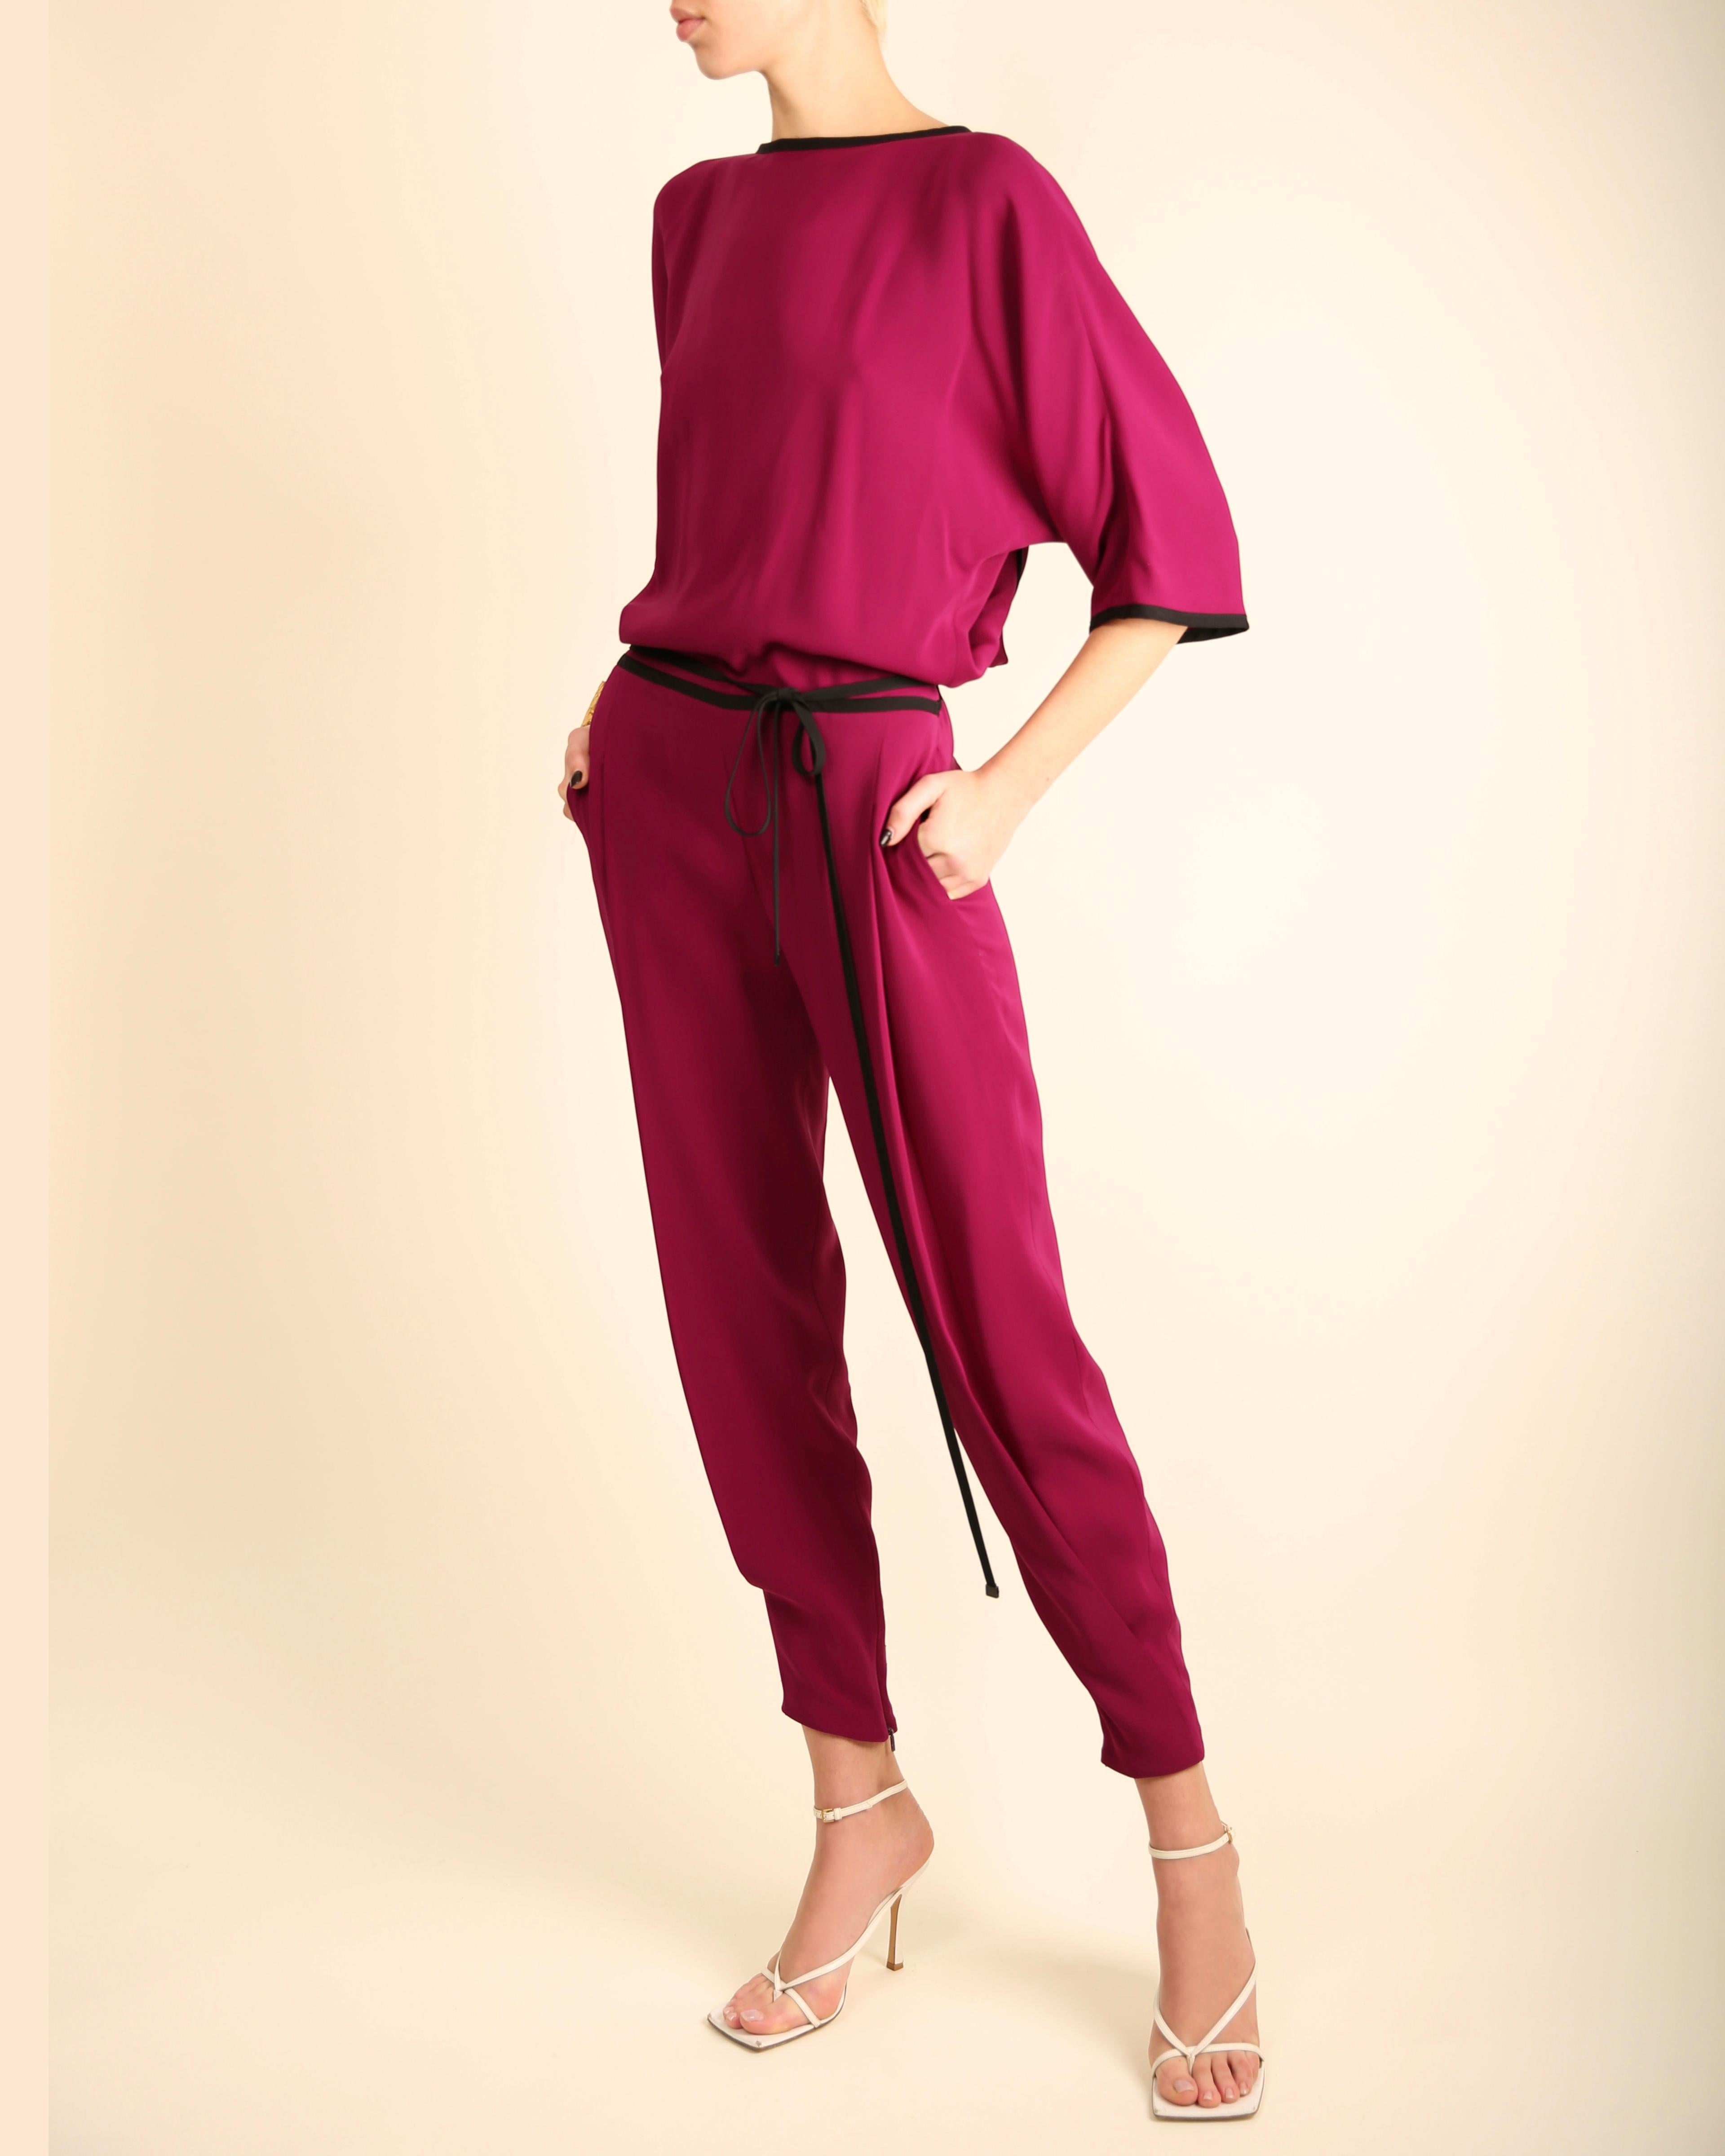 LOVE LALI Vintage

Gucci S/S 2014 jumpsuit in magenta with black trim
Dolman style sleeves
Tapered leg with ankle zips
Ties at the waist with long black ties
Pockets
Cross over low back
Concealed back zip

Composition:
100% Silk

Size:
IT